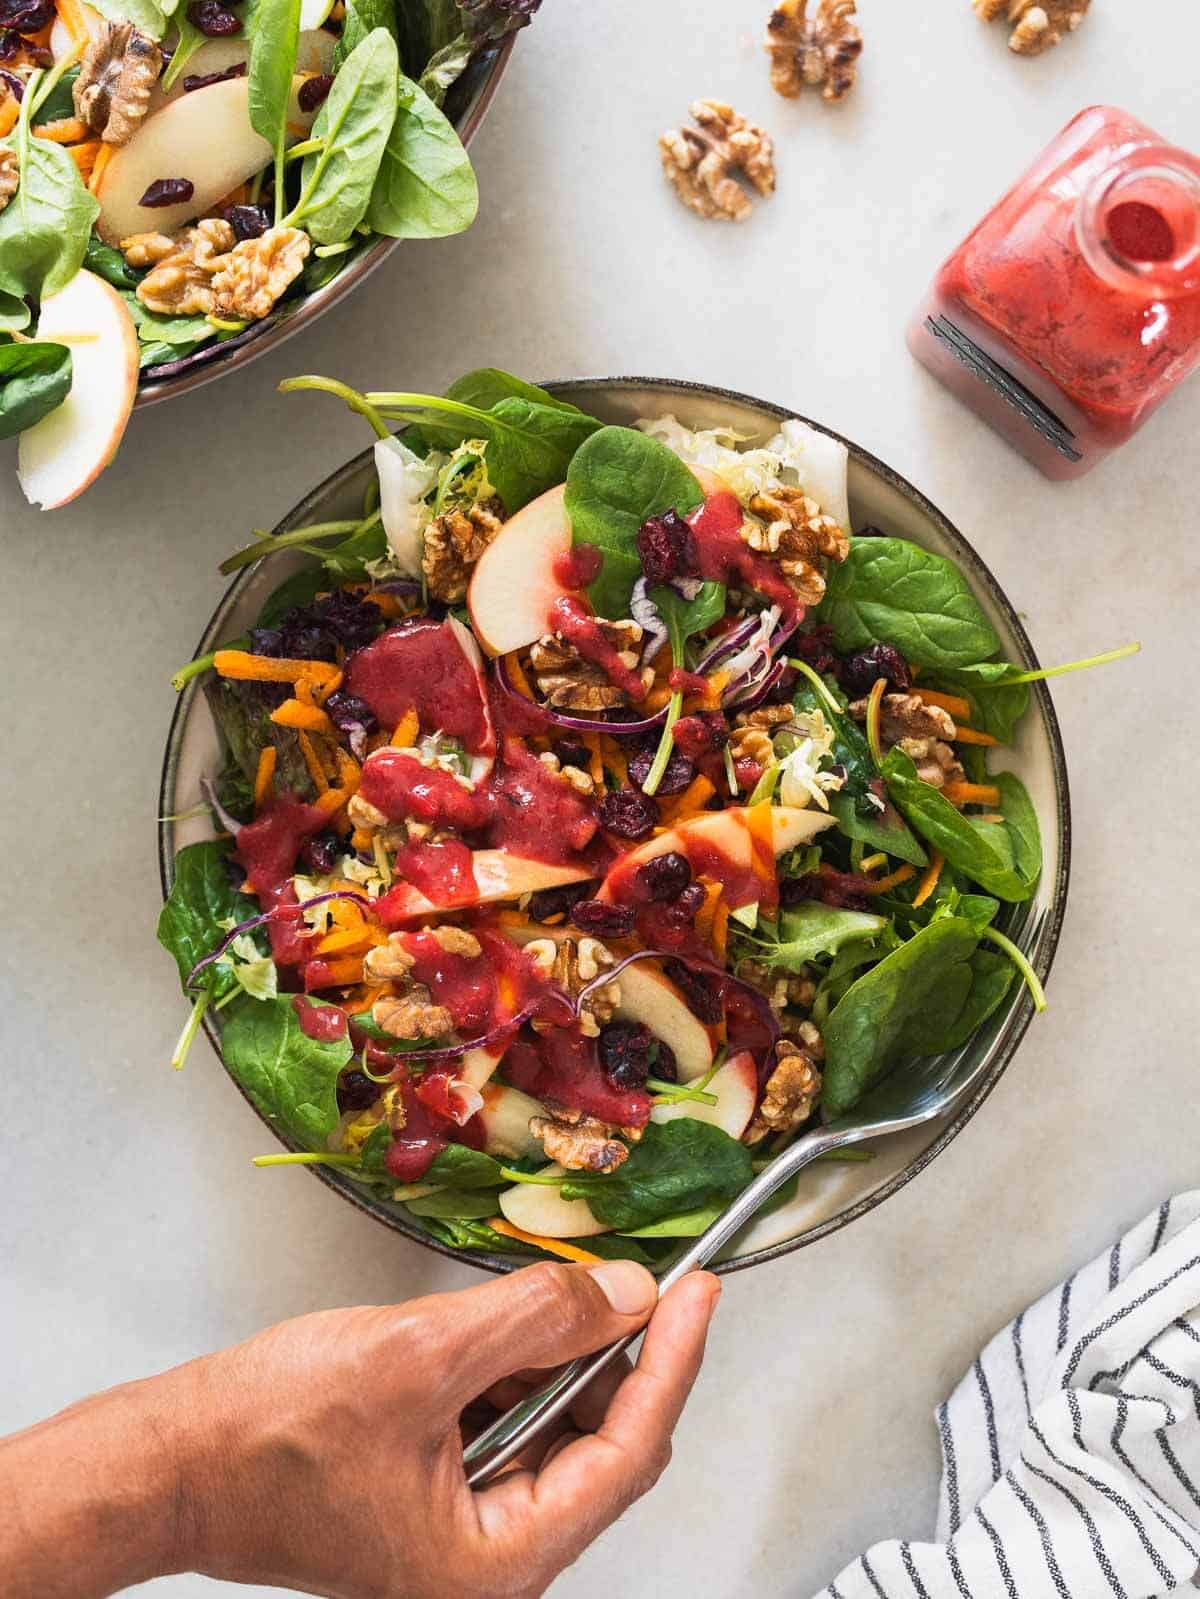 dress the apple spinach salad with the raspberry dressing.